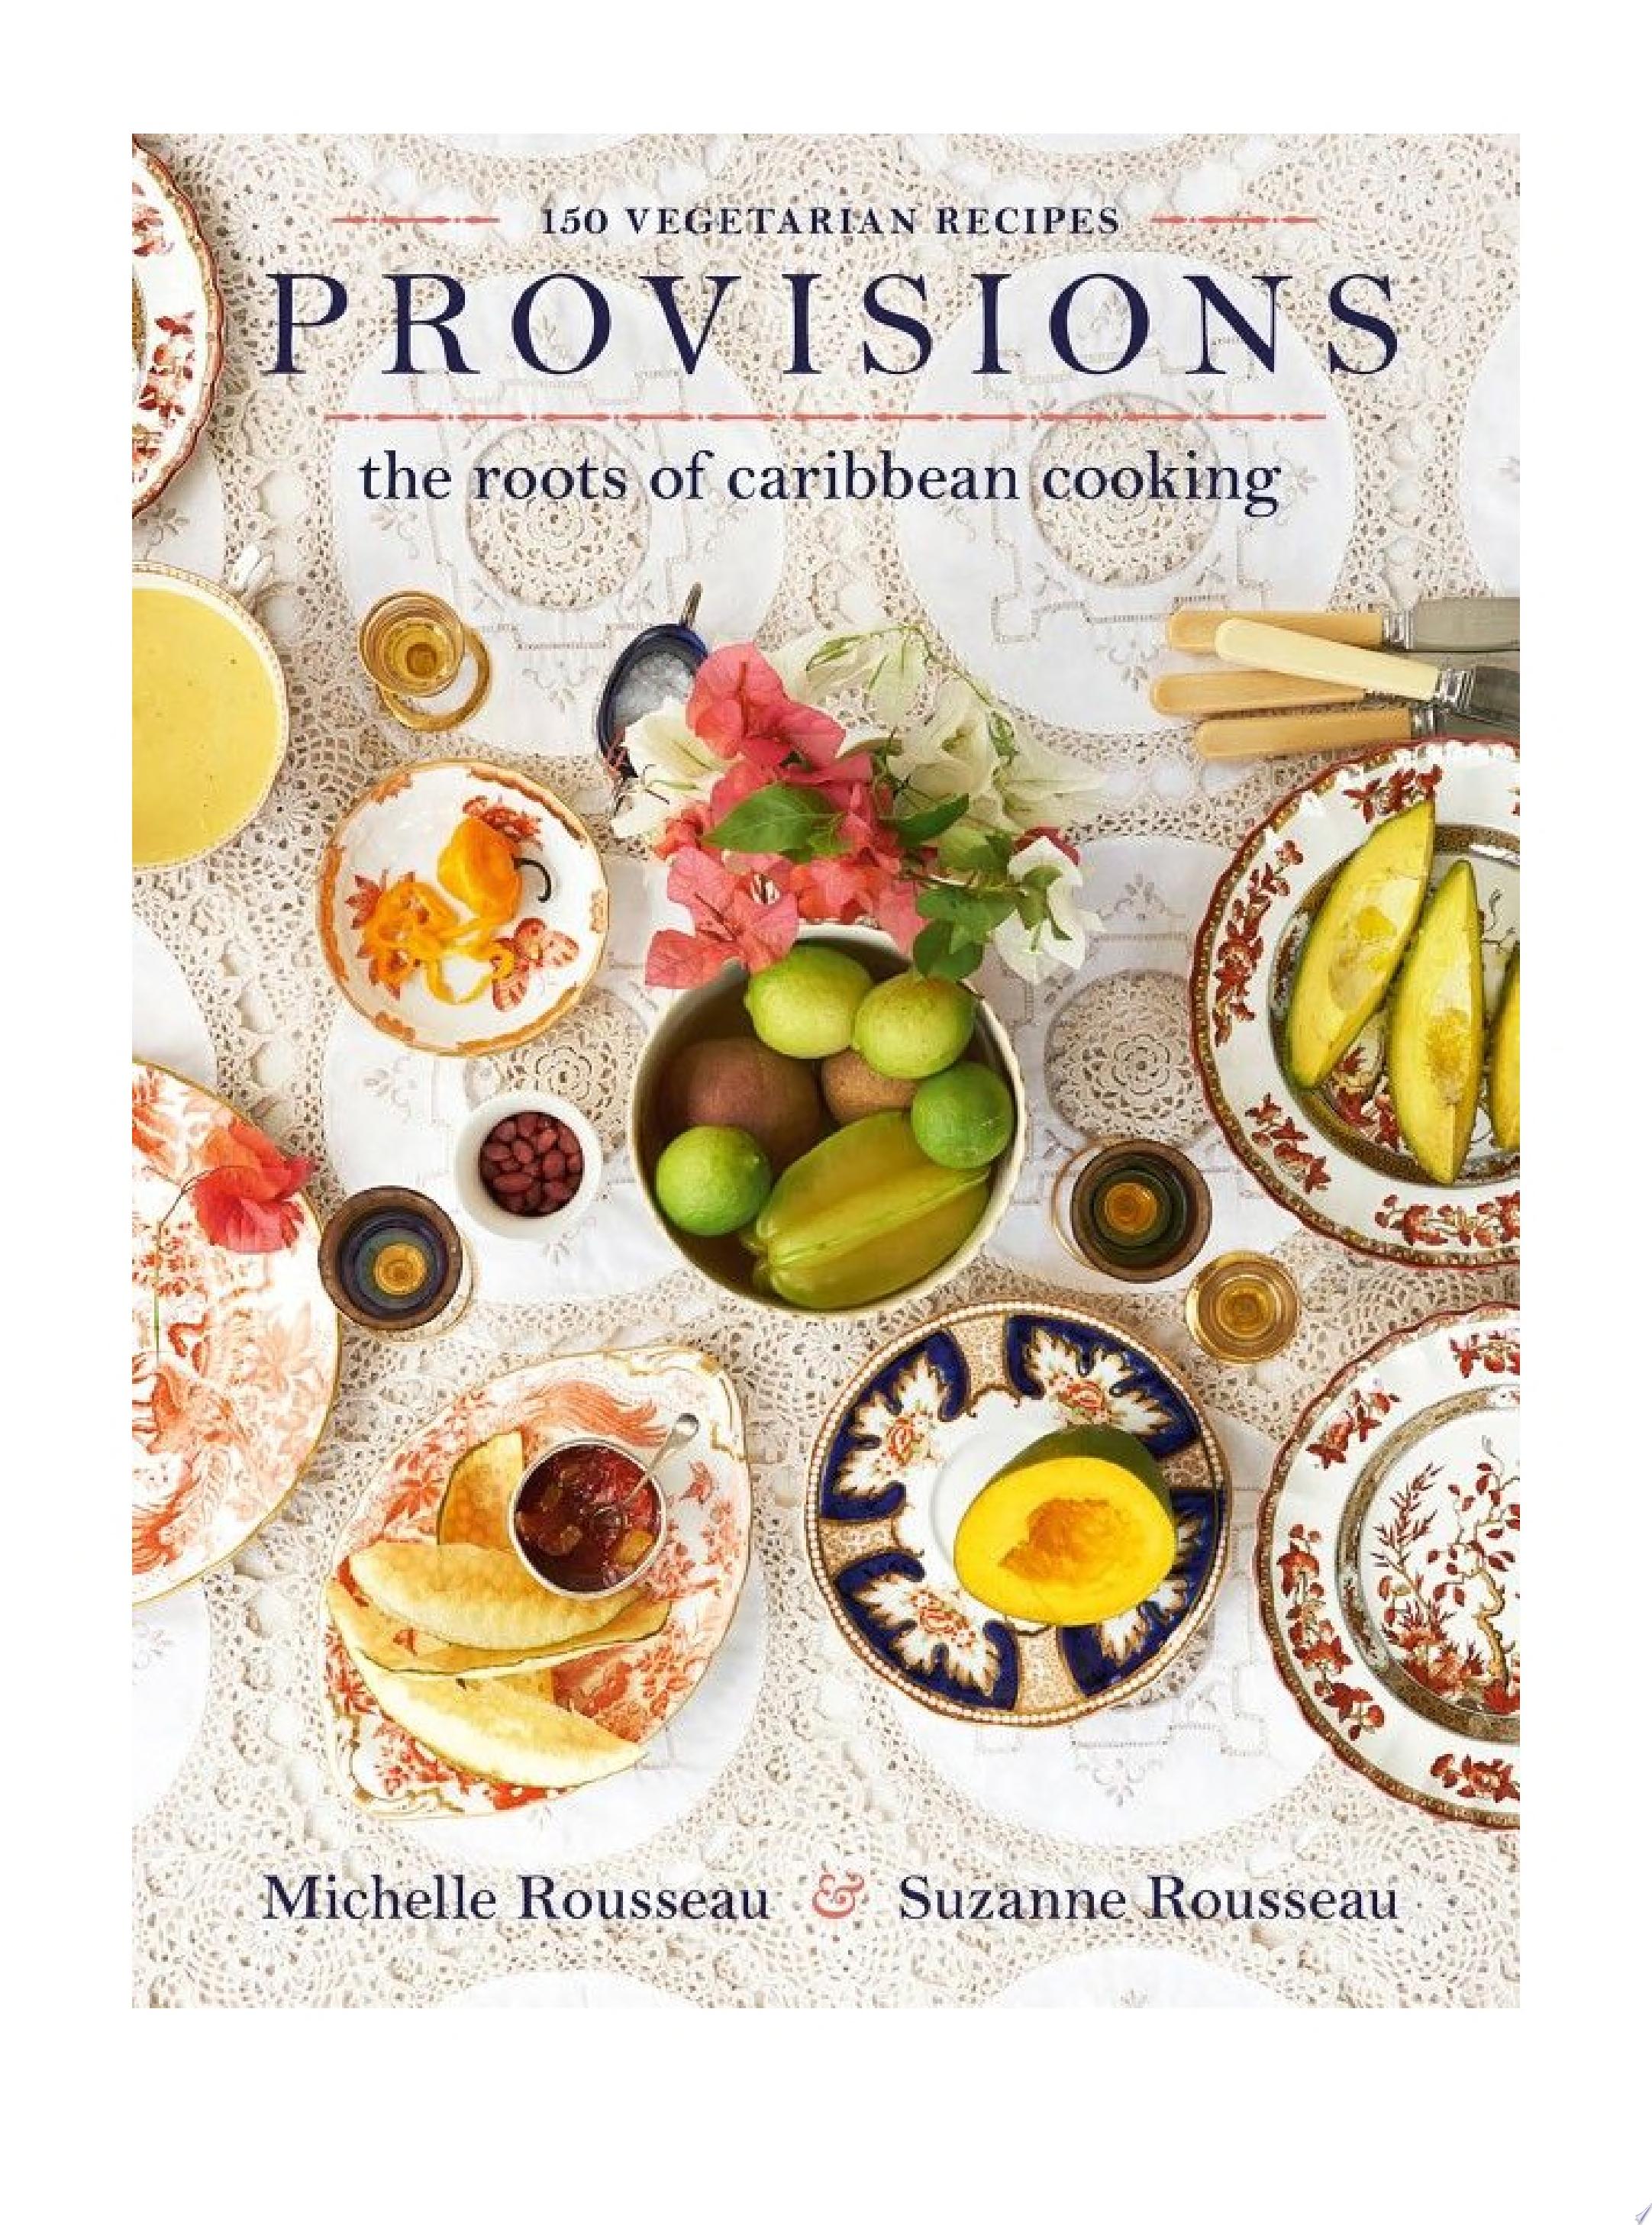 Image for "Provisions"